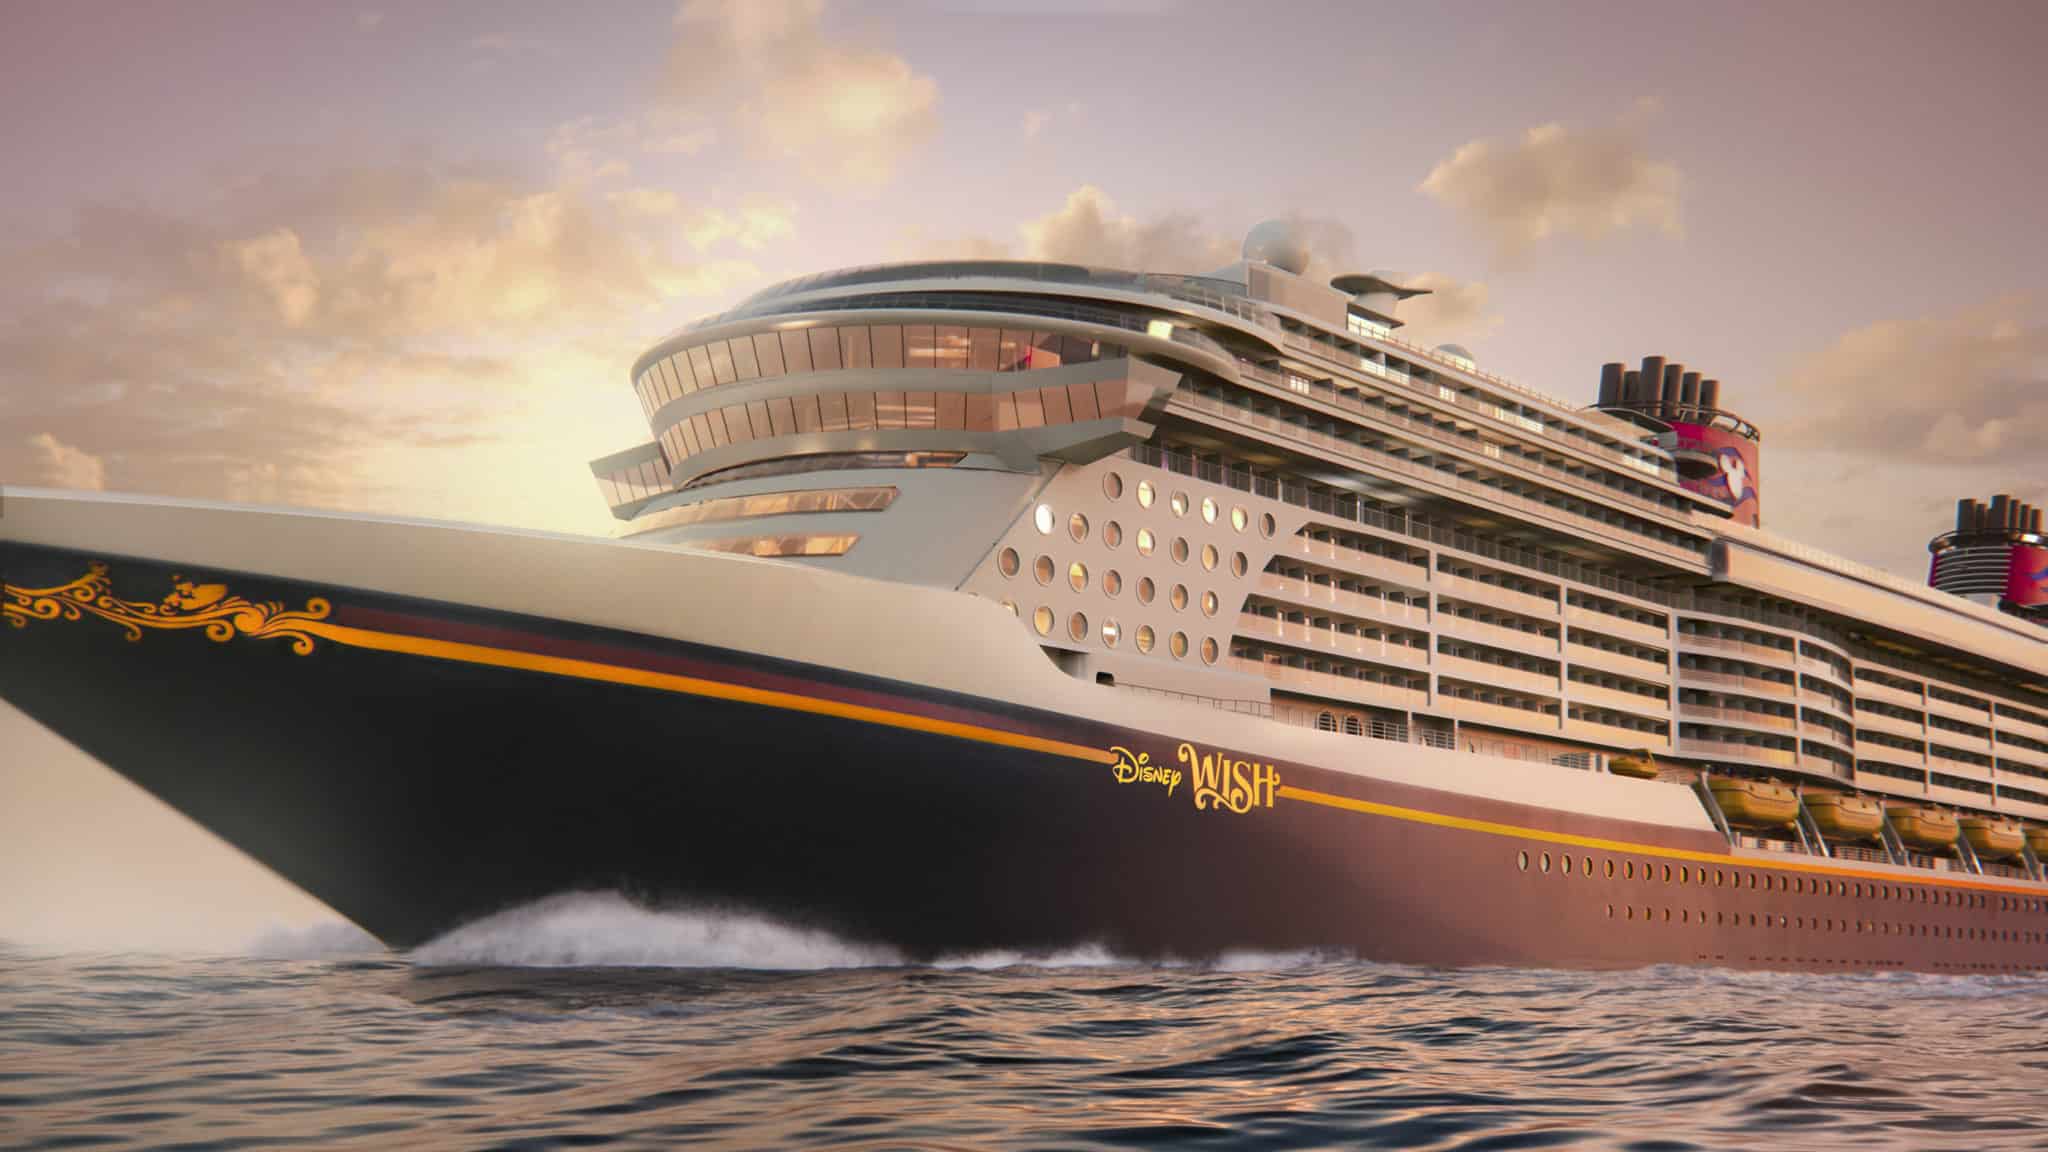 Disney Wish Disney’s Cruise Lines Latest Ship • Mouse Travel Matters